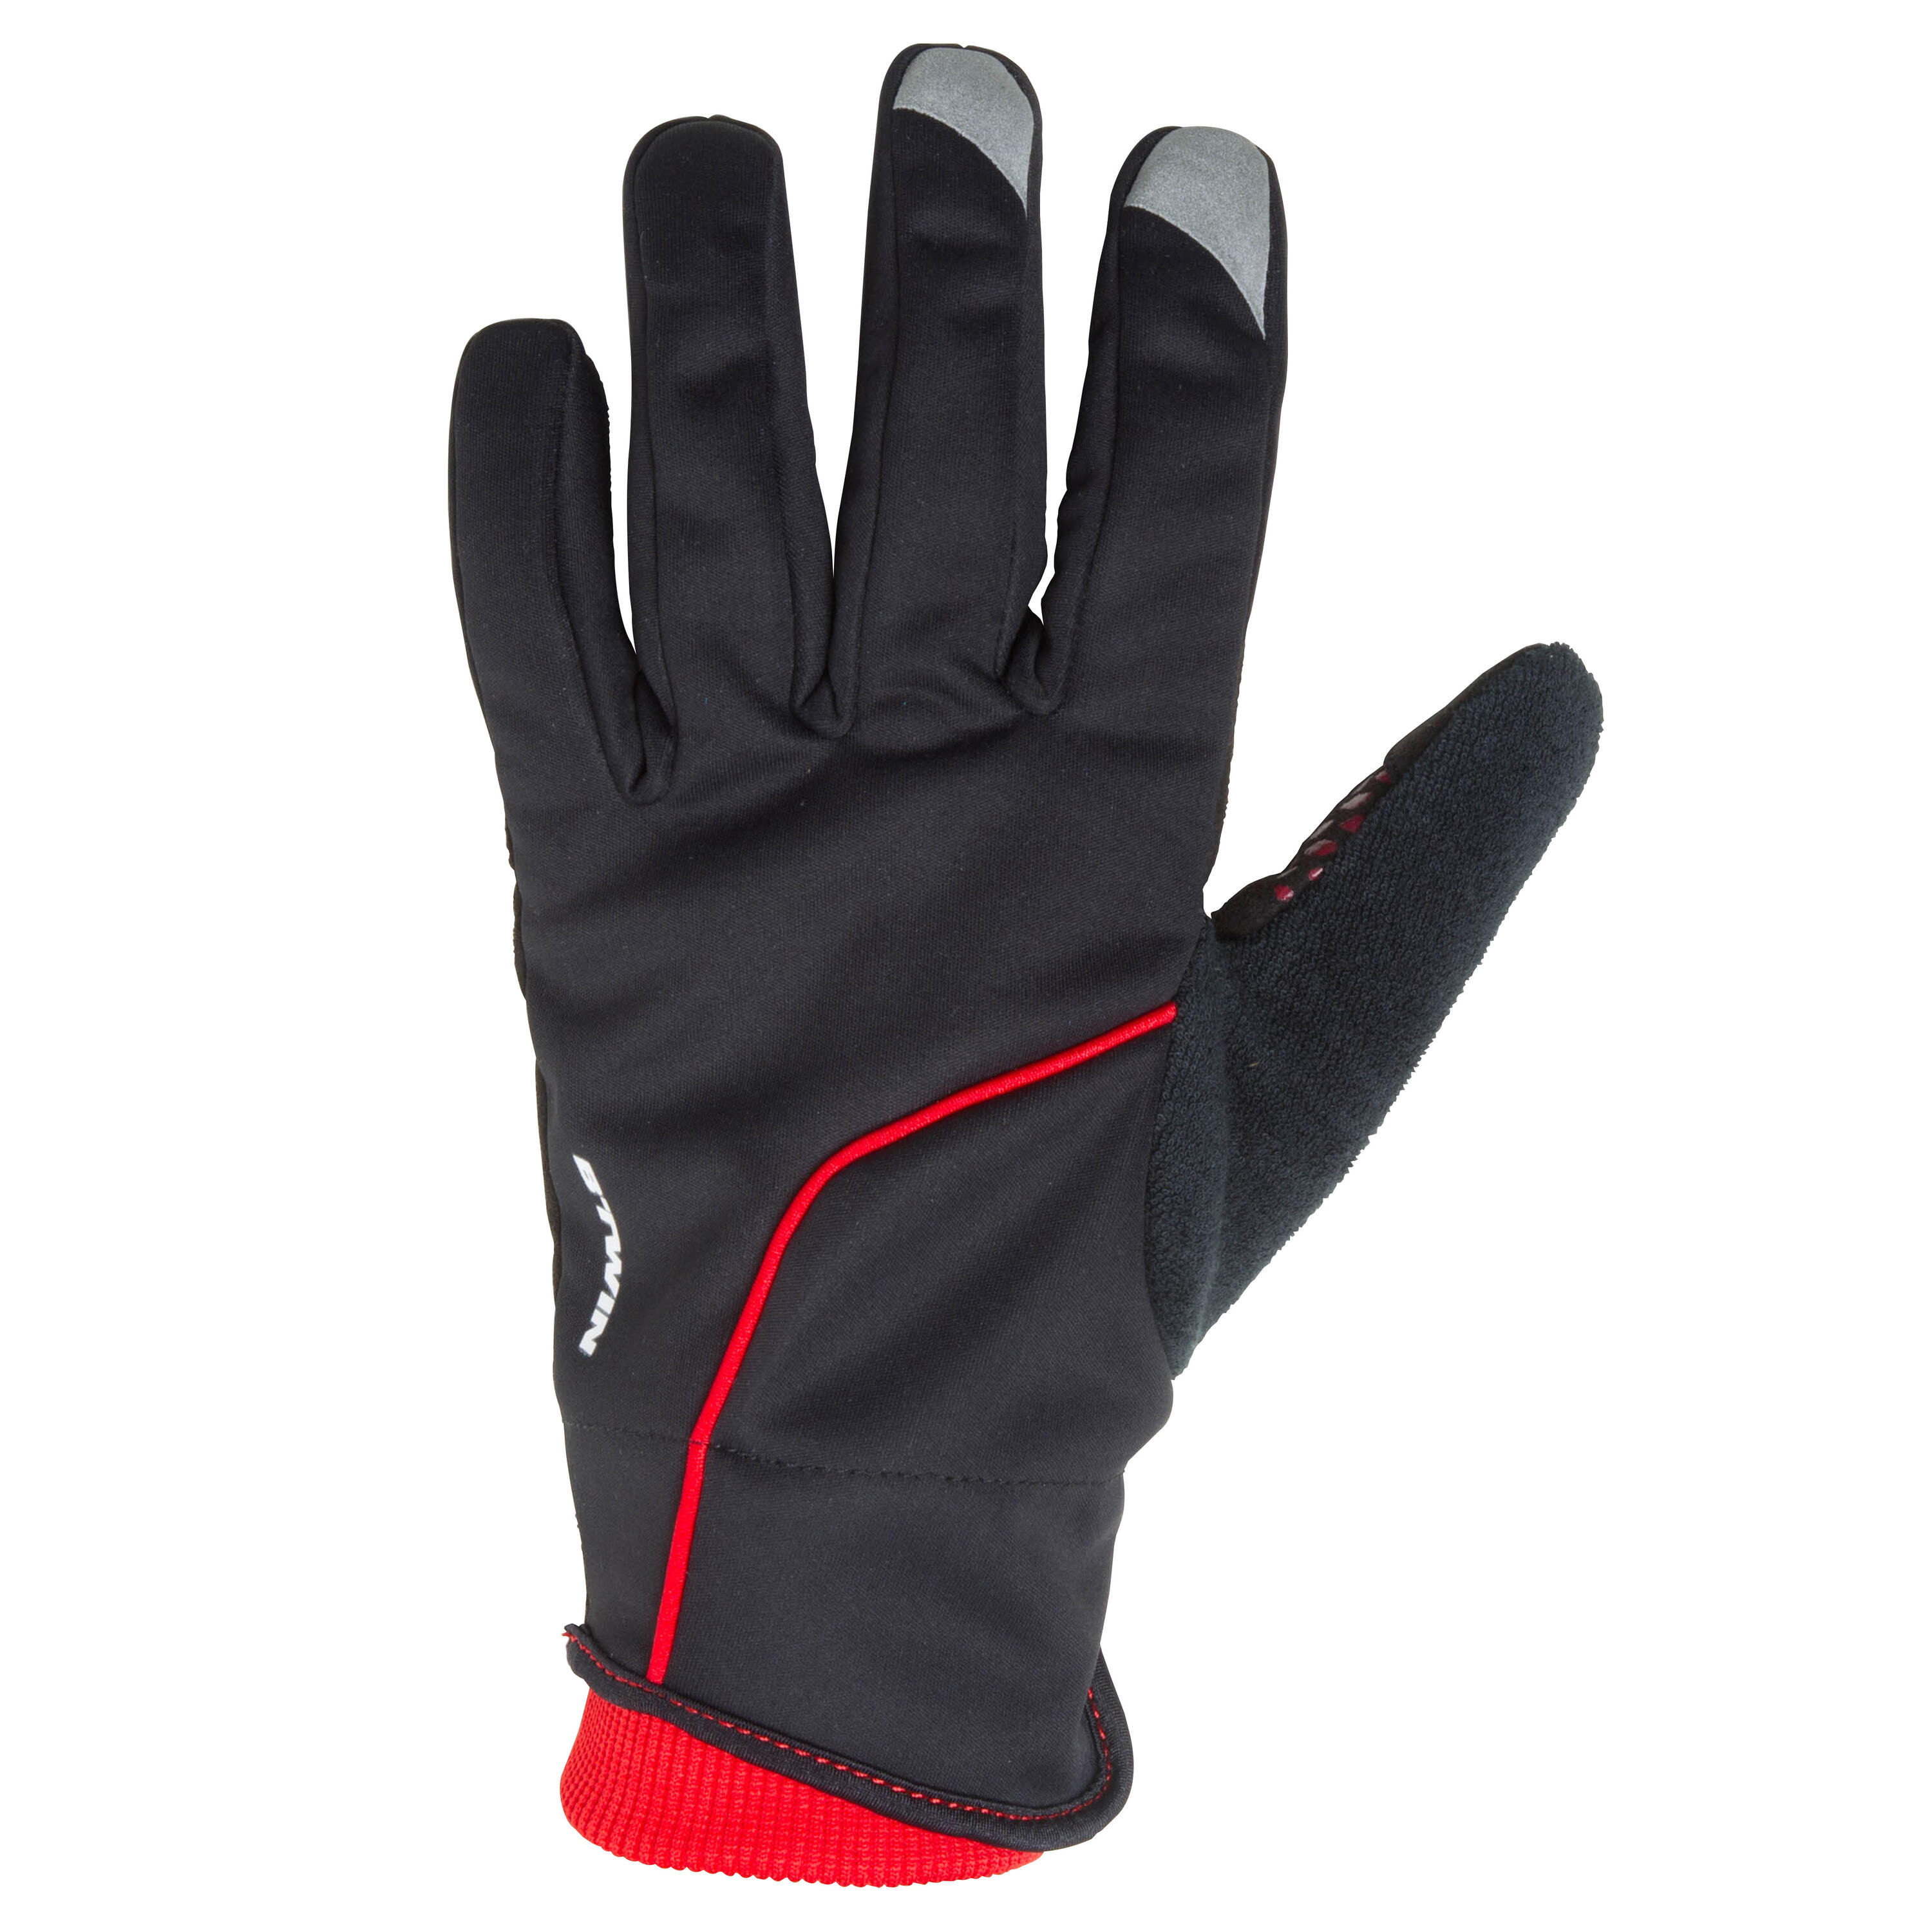 TRIBAN 500 Winter Cycling Gloves - Black/Red